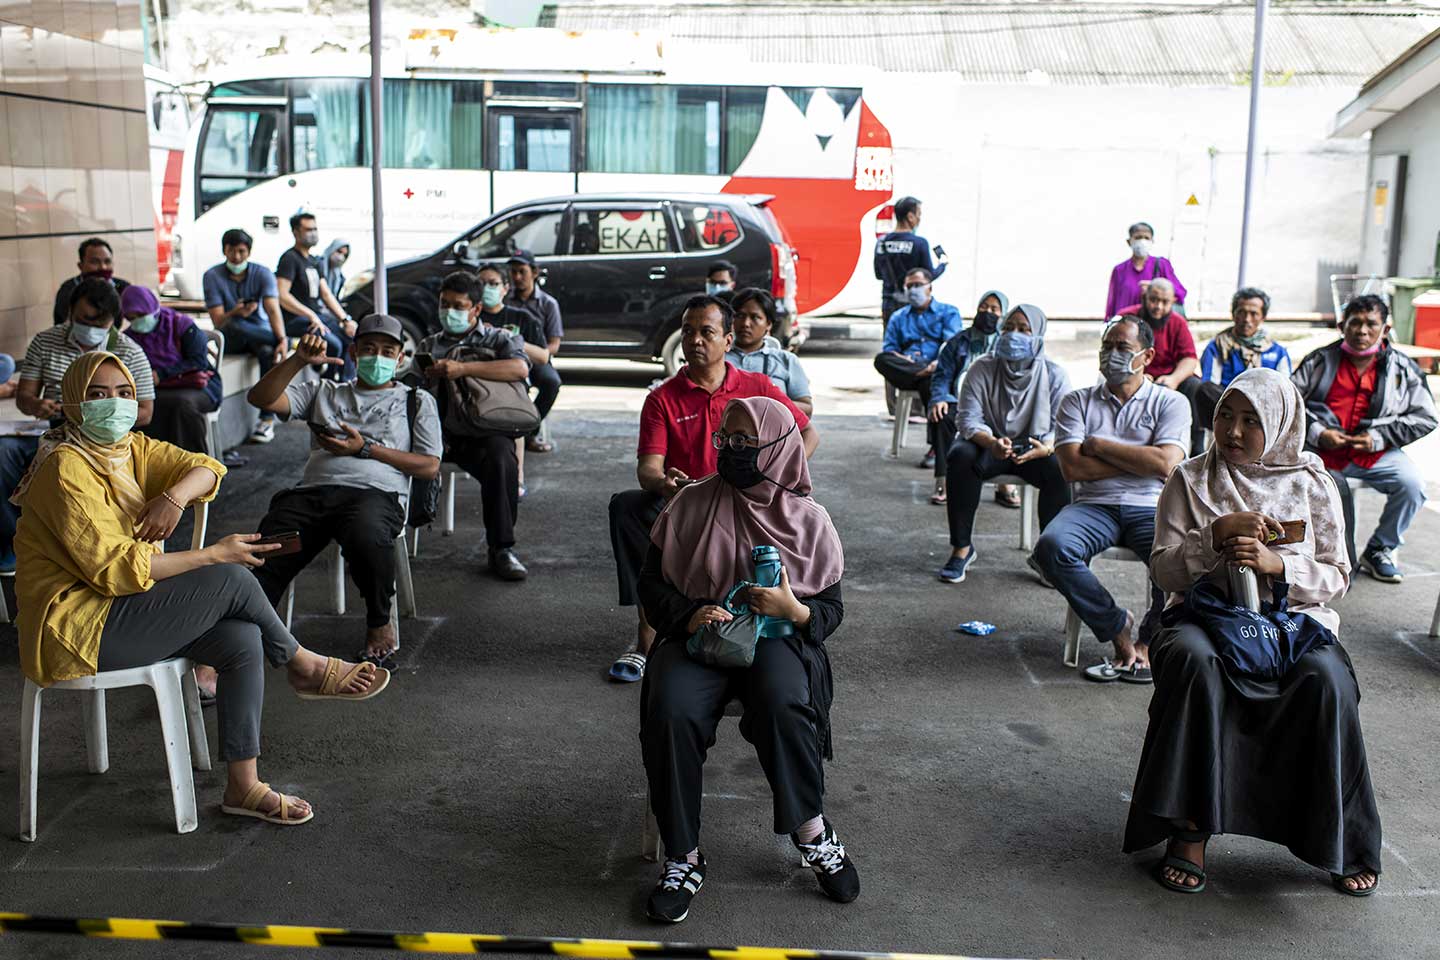 Resident queue and keep social distancing for blood donations at the PMI (Palang Merah Indonesia) office during Covid-19 outbreak in Central Jakarta, Indonesia on April, 2020.  Credit: UNICEF/2020/Arimacs Wilander